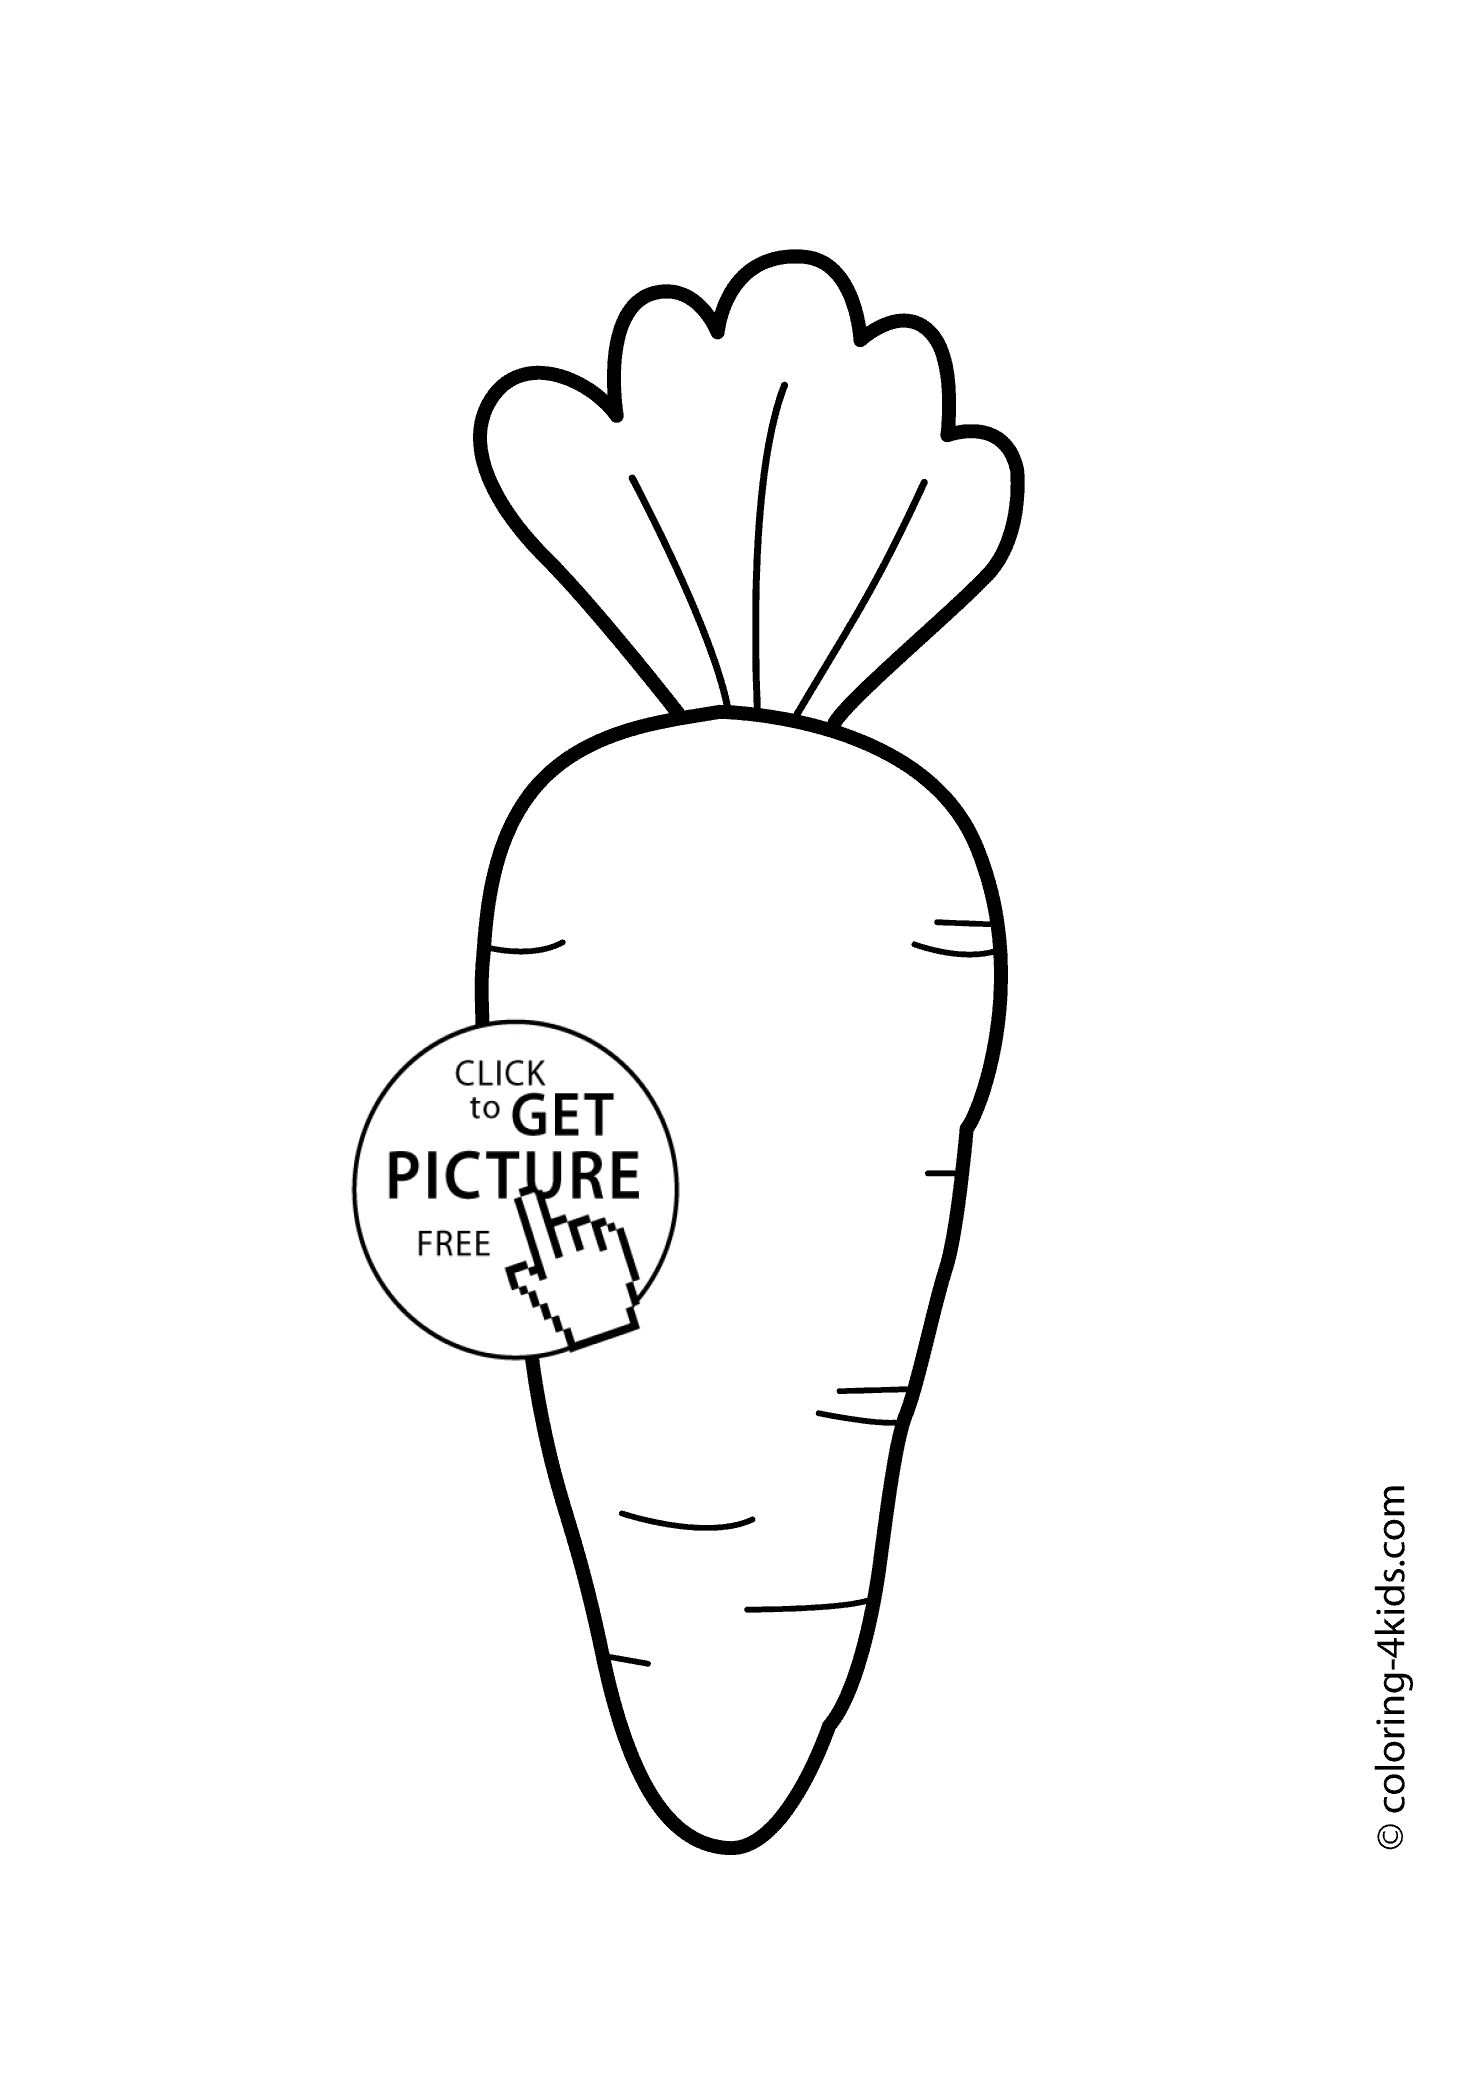 Vegetables Coloring Page Carrot With Leaves Vegetables Coloring Pages For Kids Printable Free